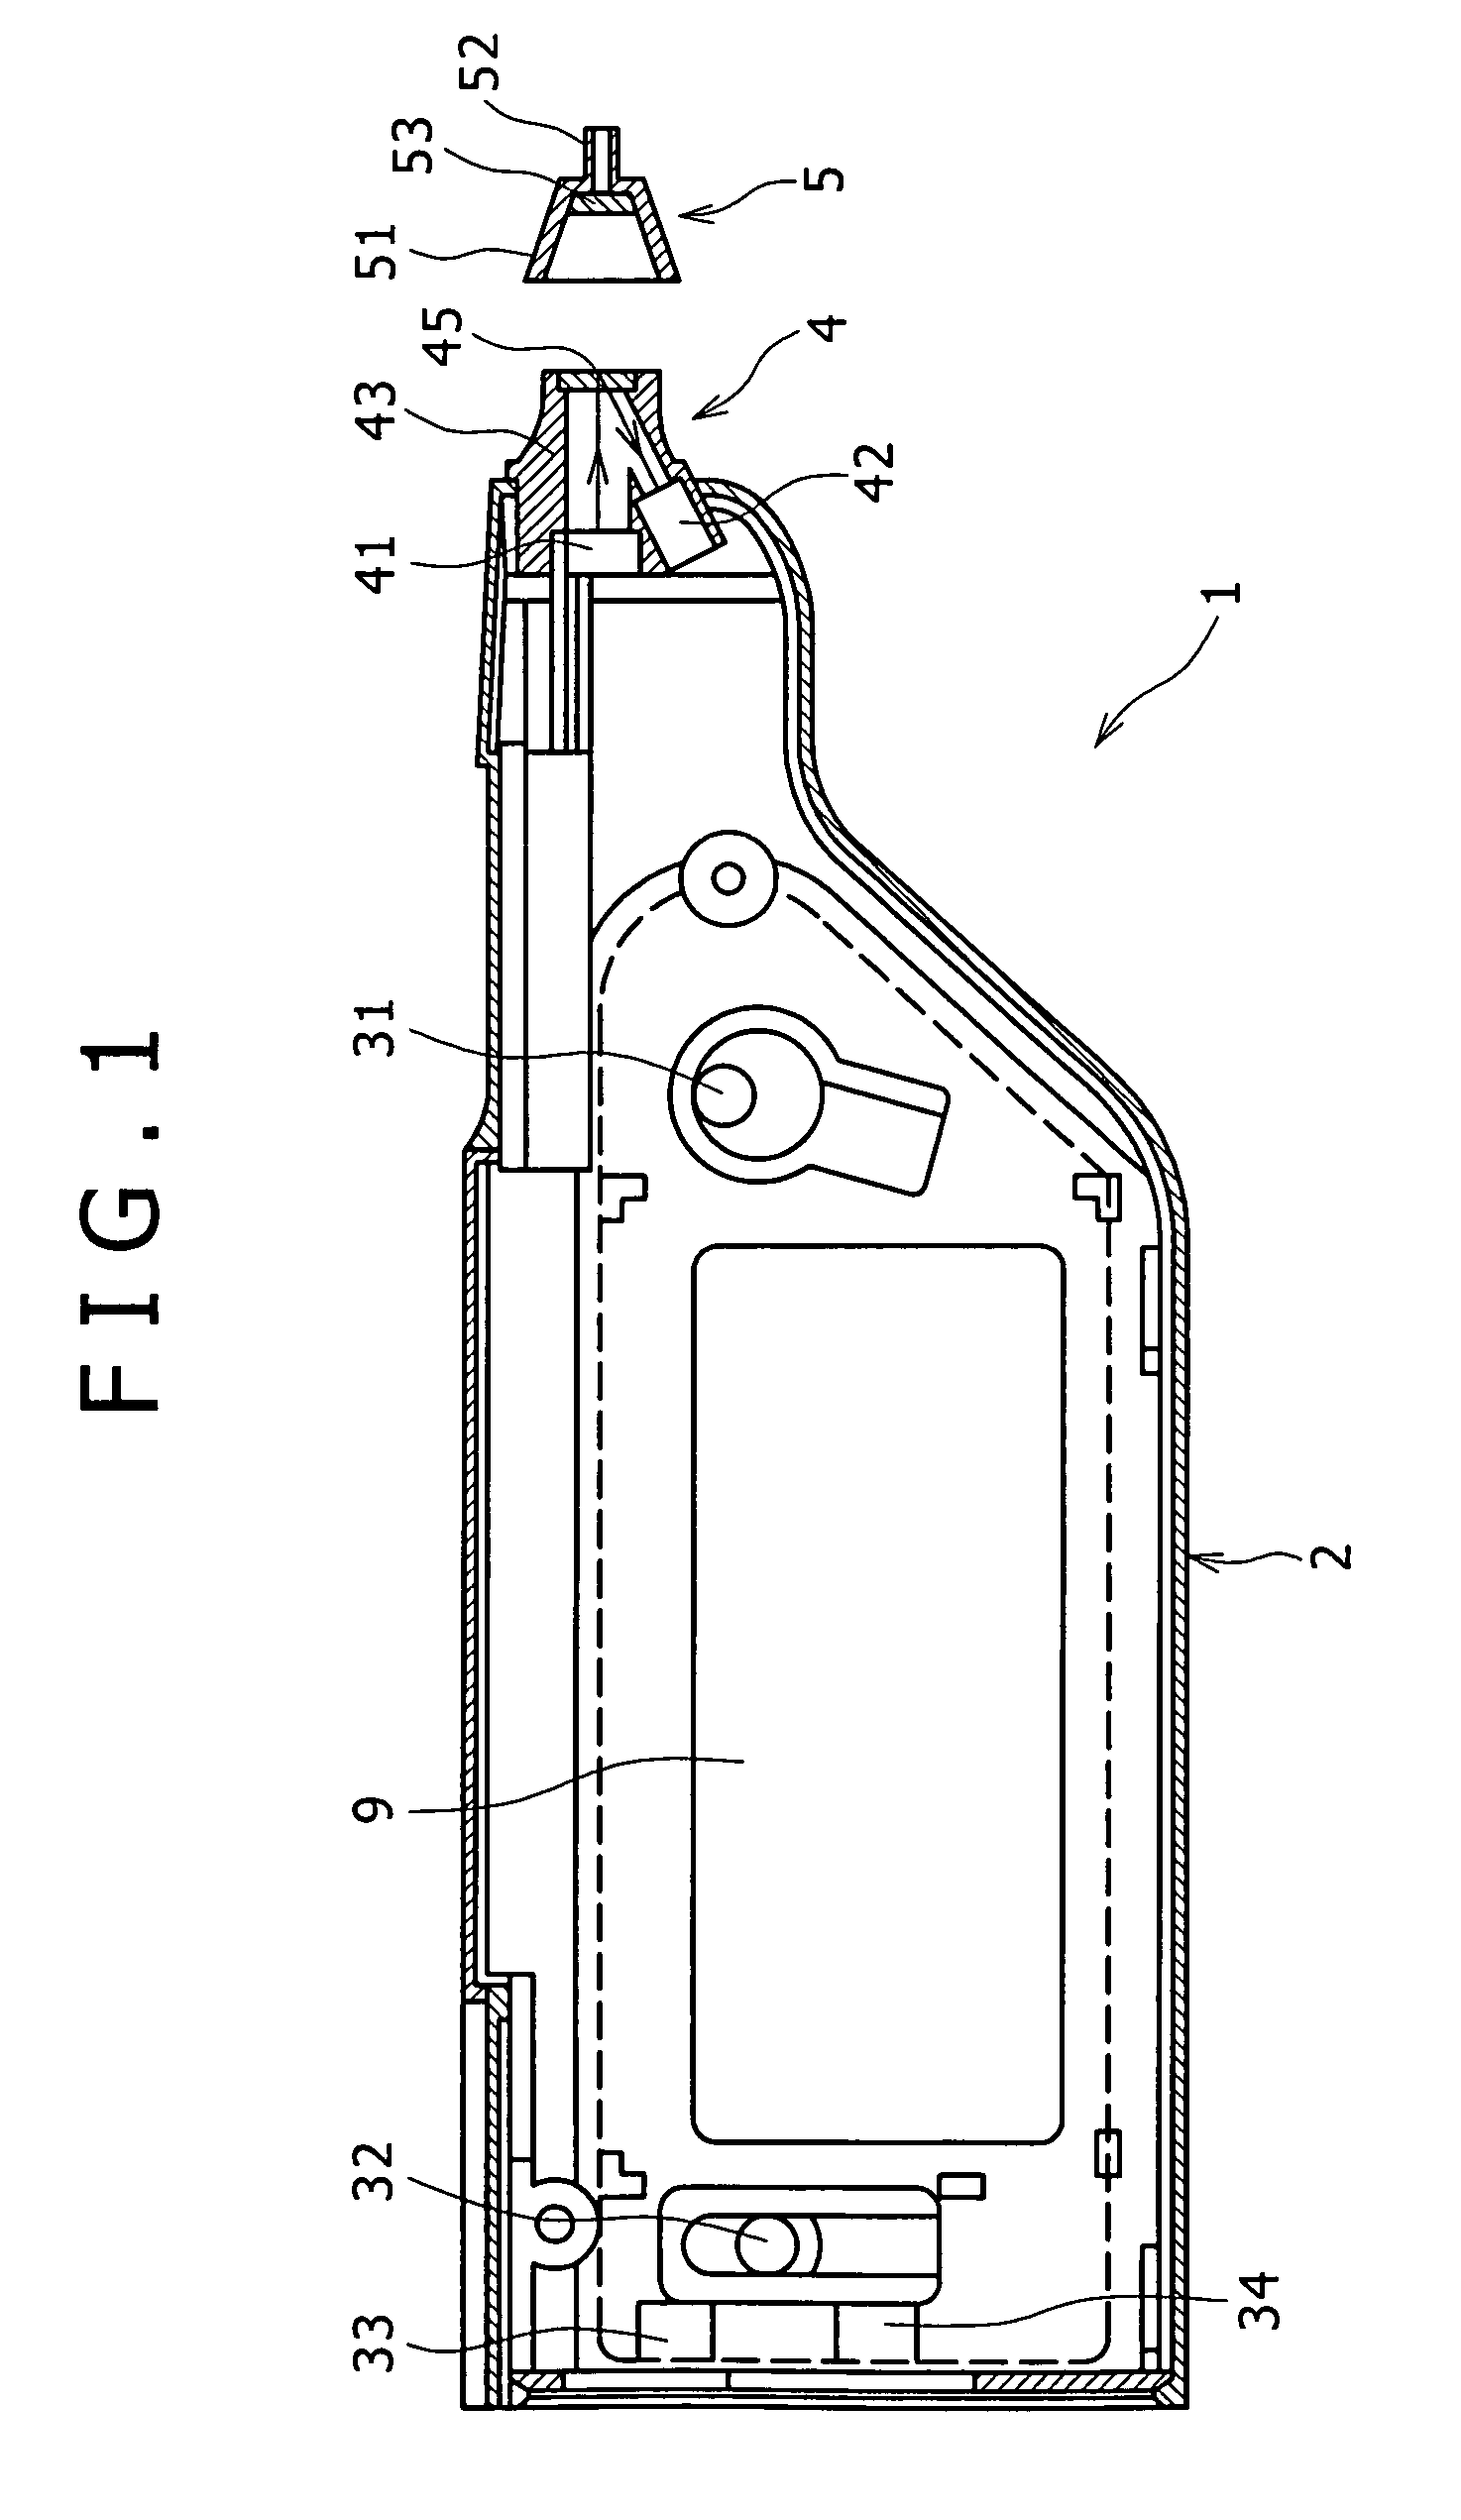 Component measuring device